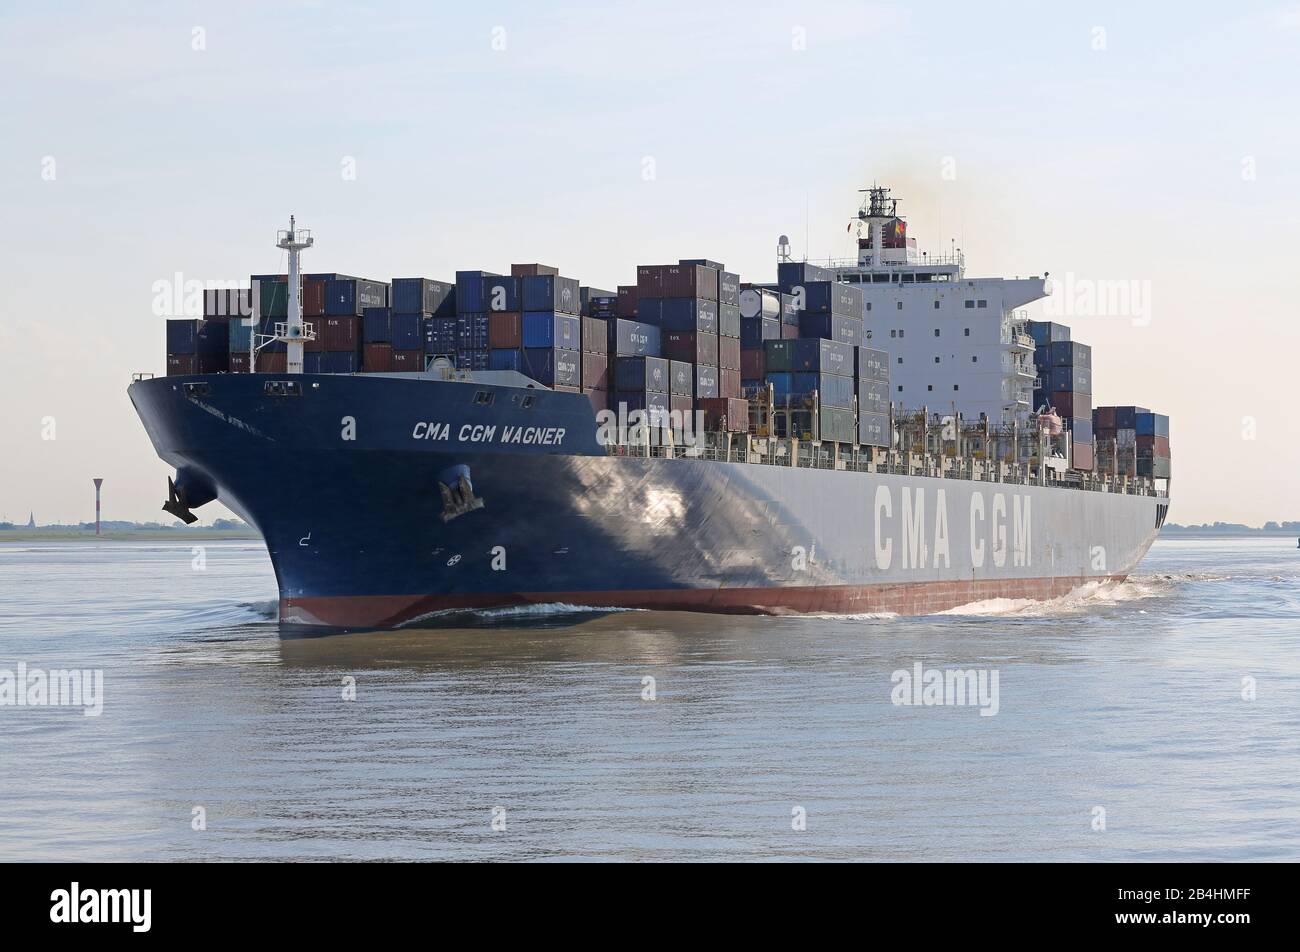 CMA CGM Wagner on river Elbe Stock Photo